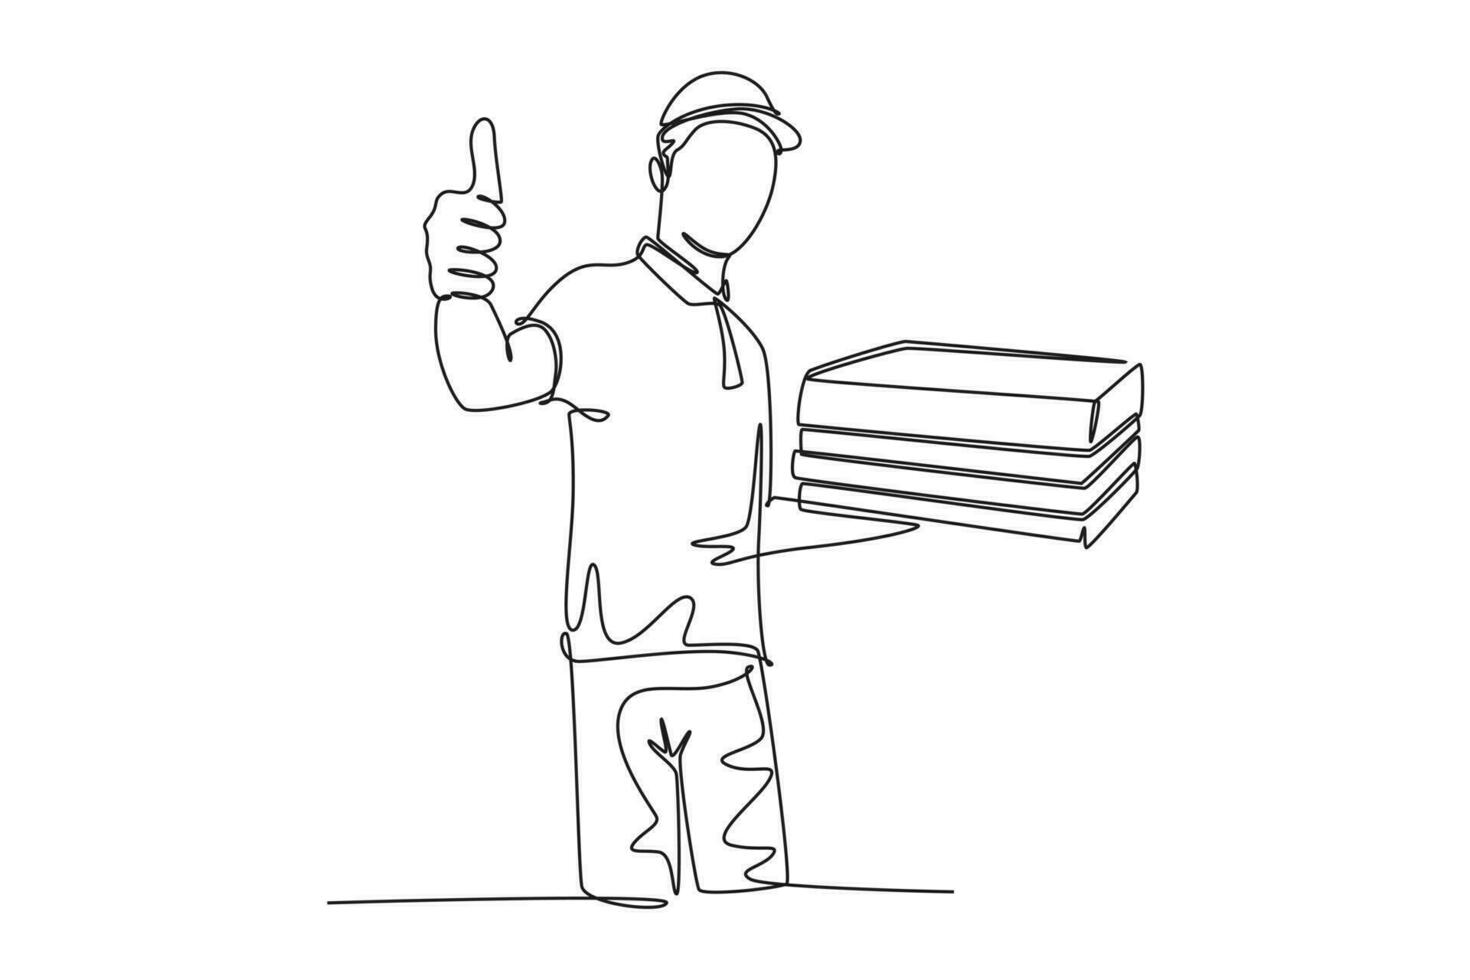 Continuous one line drawing of young happy pizza delivery man gives thumbs up gesture before deliver package to customer. Food delivery service business. Single line design vector graphic illustration